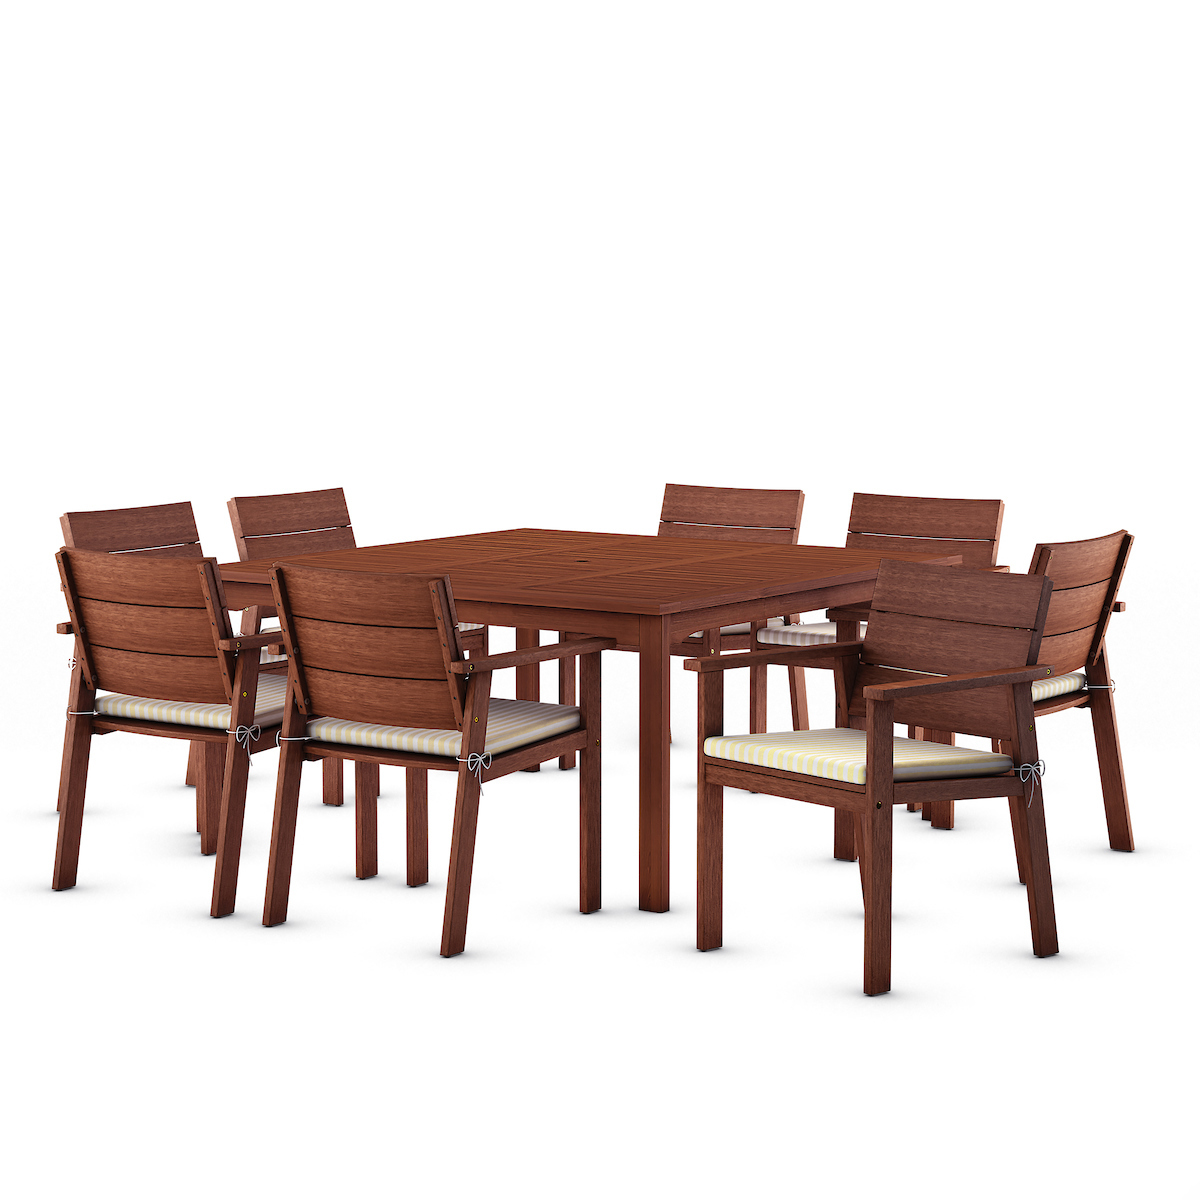 Nelson 9-Piece Square Patio Dining Set, Solid Wood 100% FSC Certified - image 2 of 8